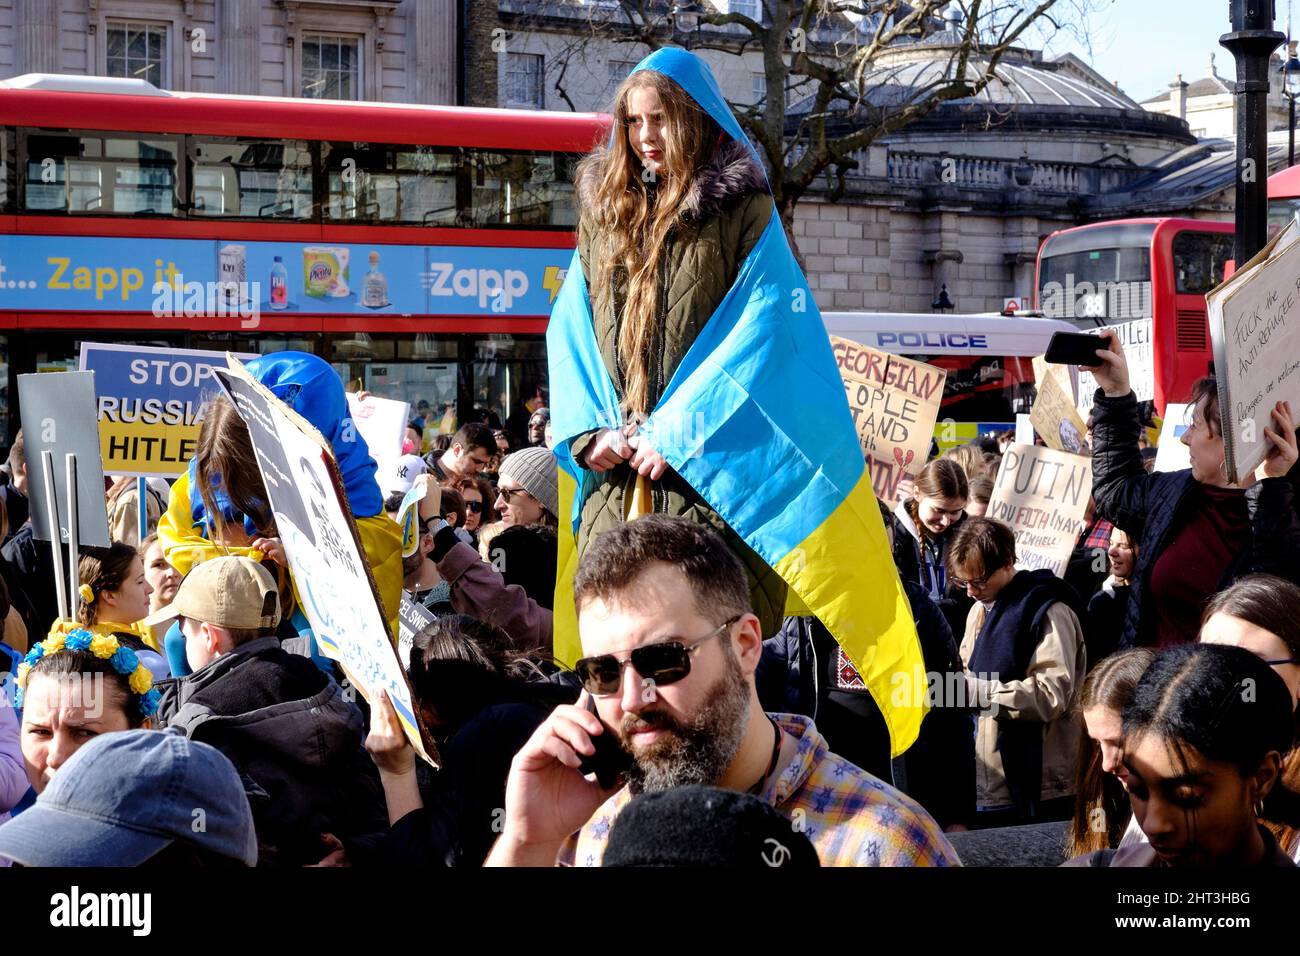 26th February 2022: Ukrainian nationals and pro-Ukraine supporters rally in Whitehall  to protest against the Russian invasion of Ukraine. London, United Kingdom Stock Photo